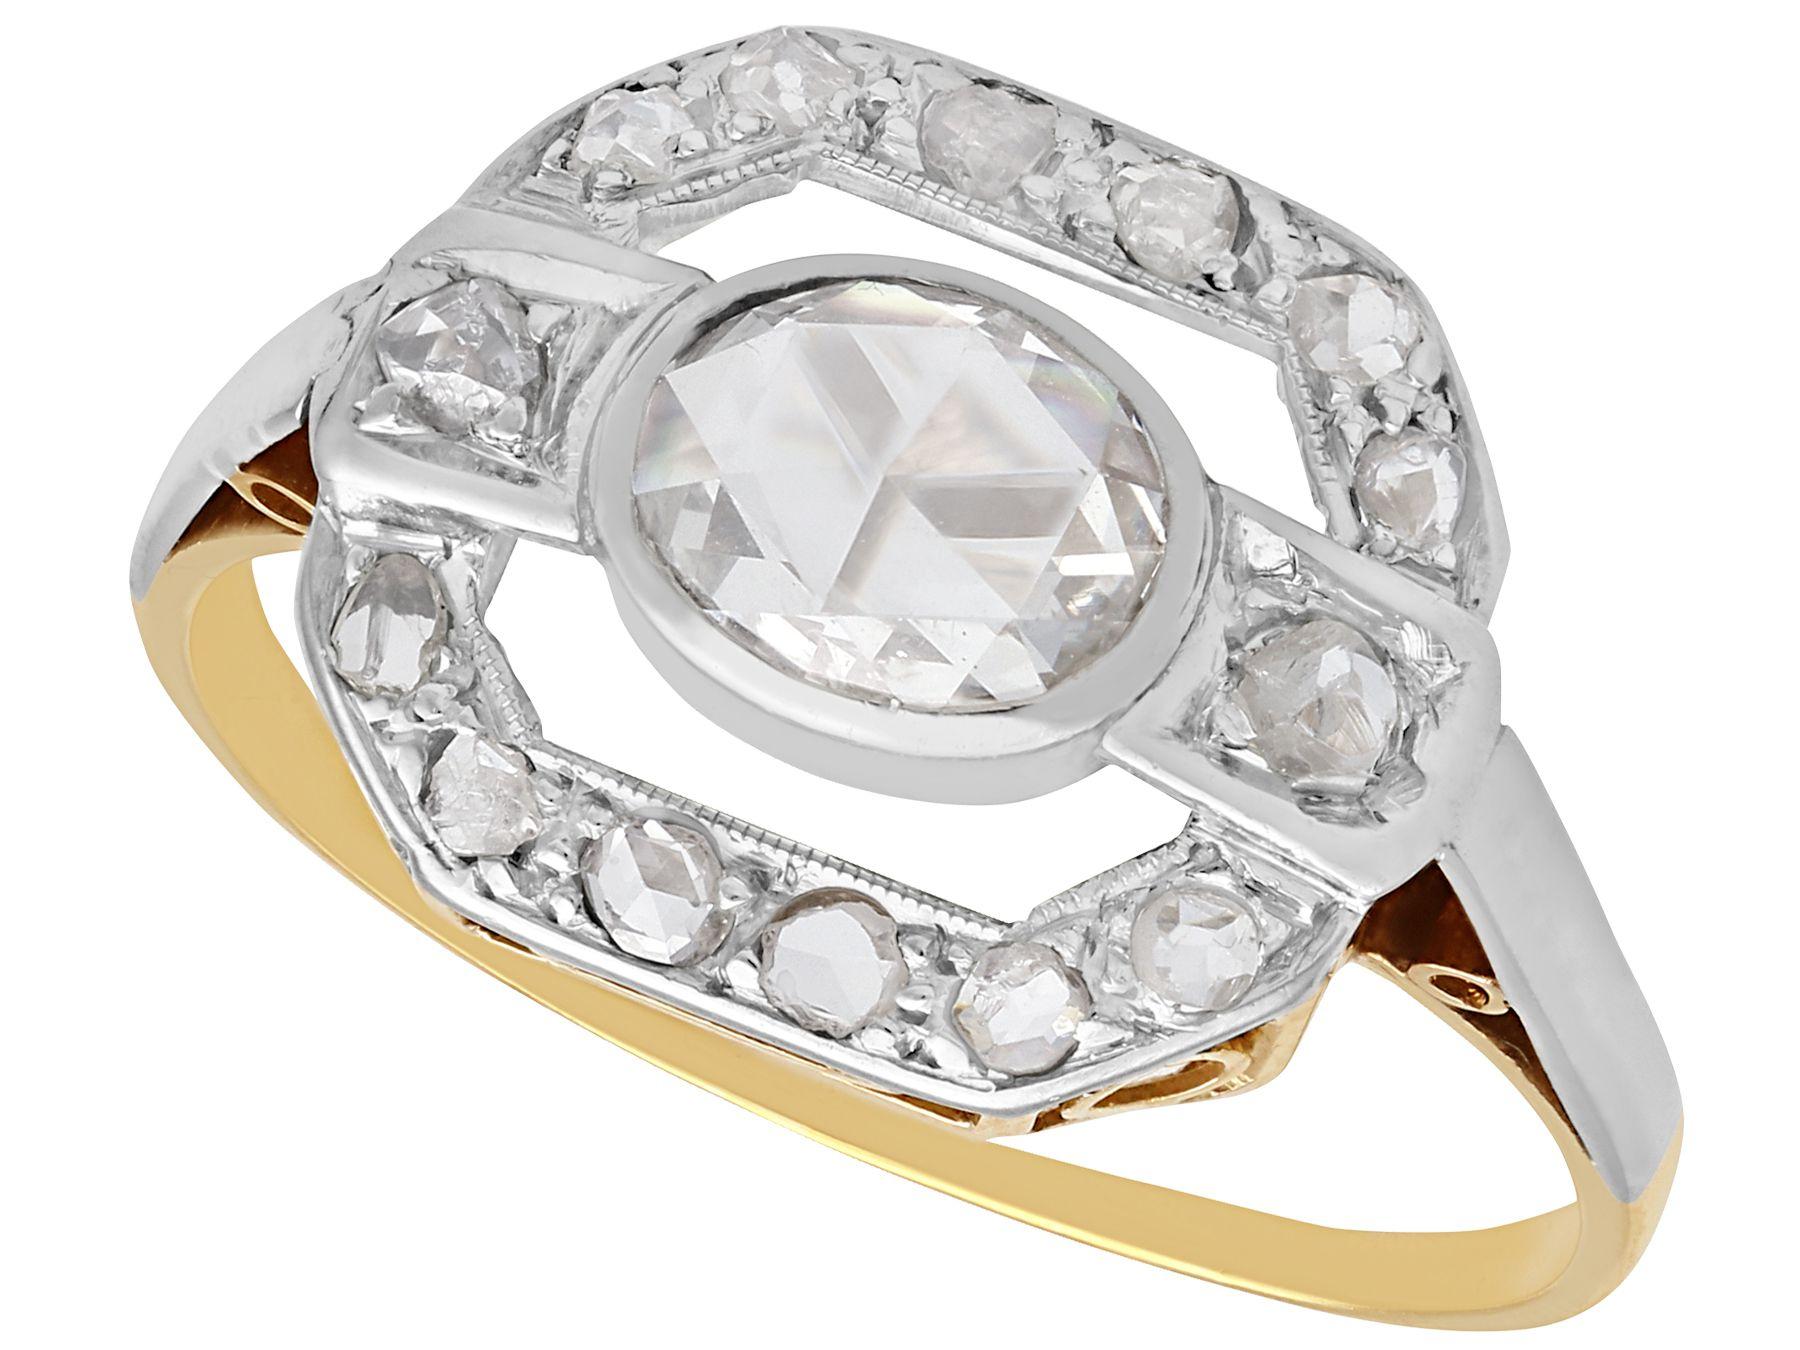 A fine and impressive 0.61 carat diamond and 18 karat yellow gold, 18 karat white gold dress ring; part of our diverse antique jewellery collections.

This fine and impressive antique oval diamond ring has been crafted in 18k yellow gold with a 18k